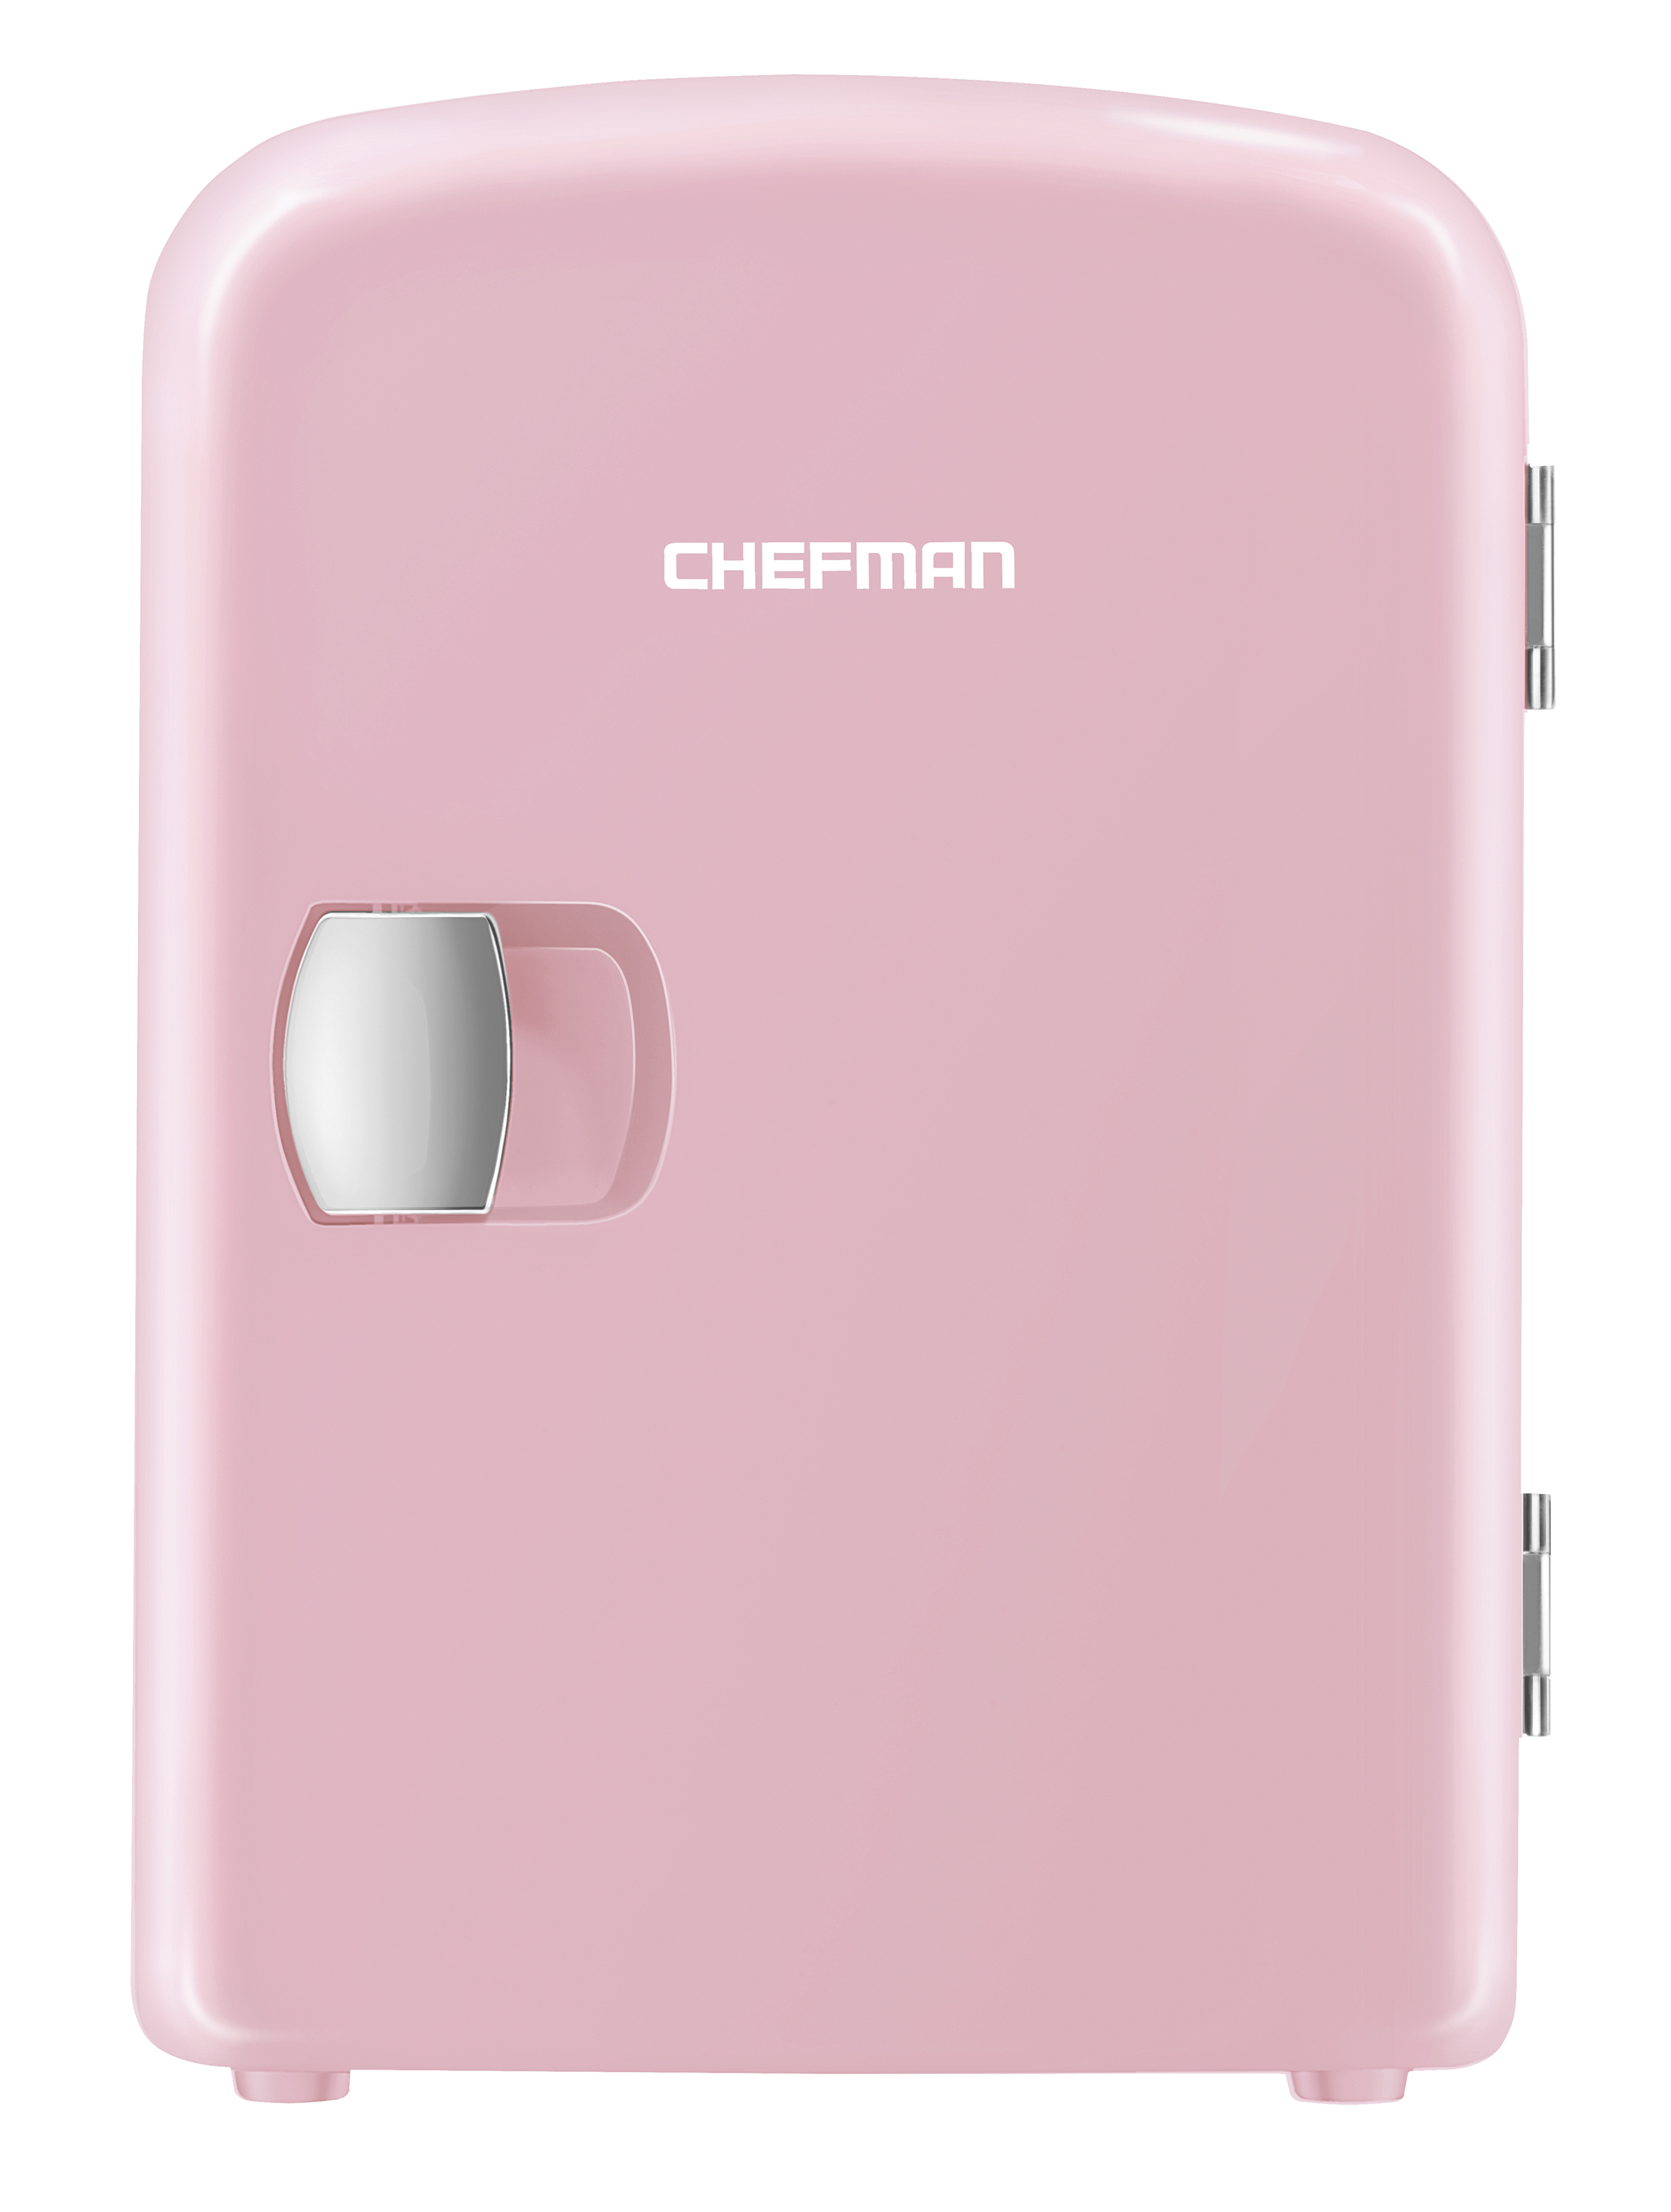 Chefman Portable 4L Mini Fridge w/ Heating and Cooling - Pink, New - image 1 of 5